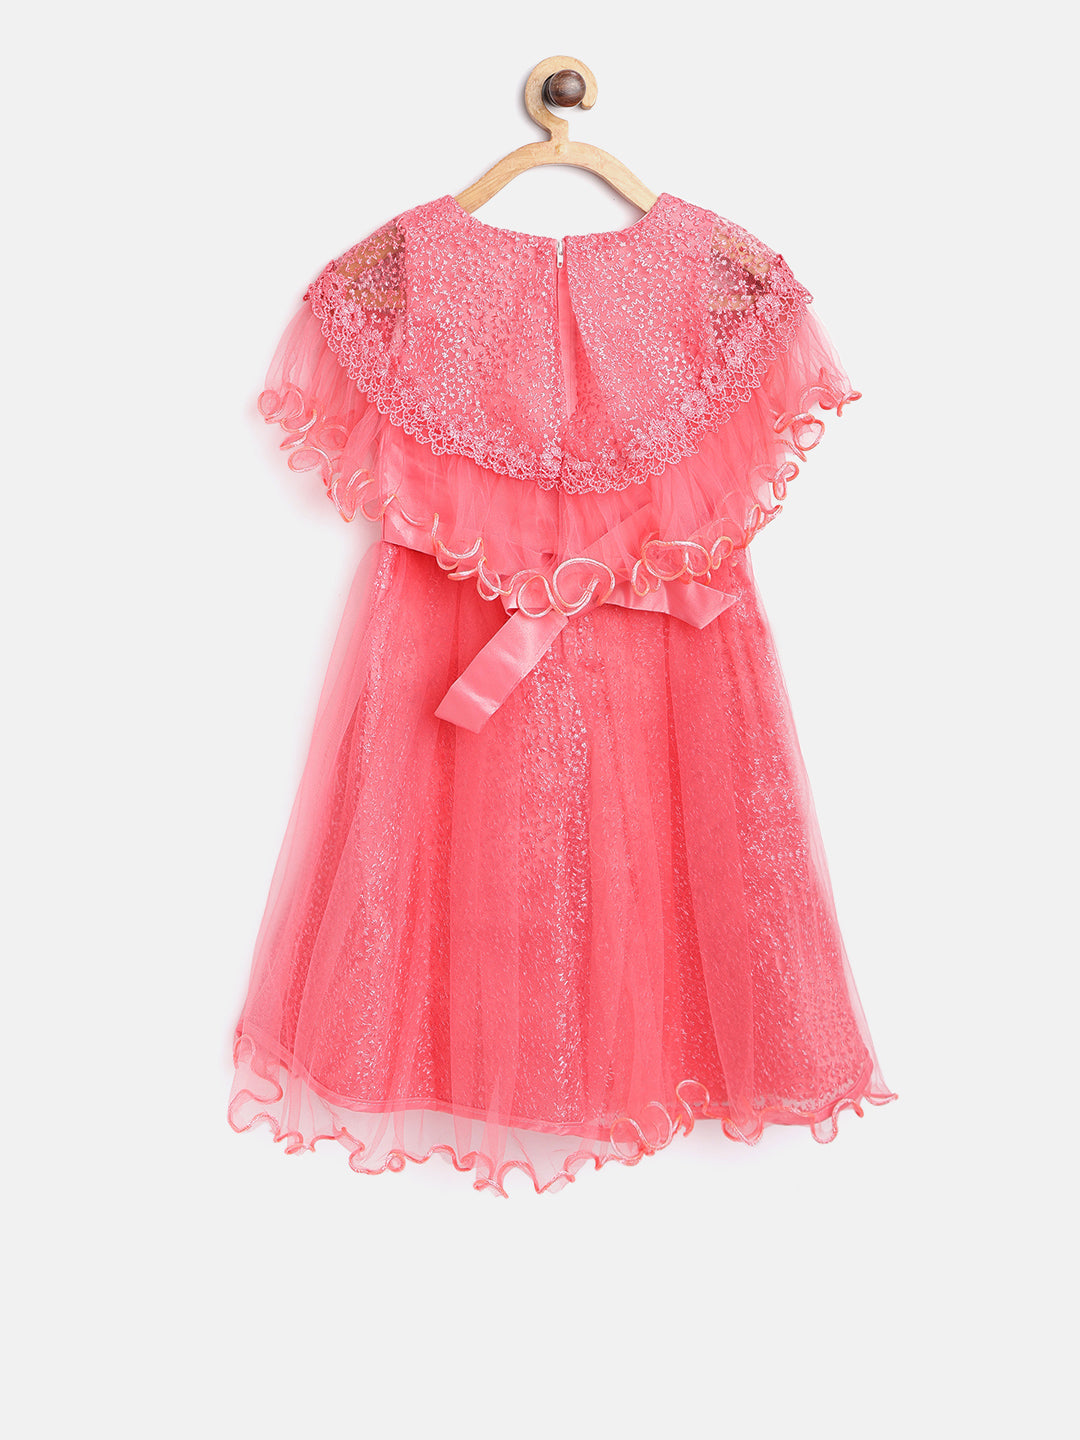 Girls Fuchsia Pink embroidered and embellished Party Dress